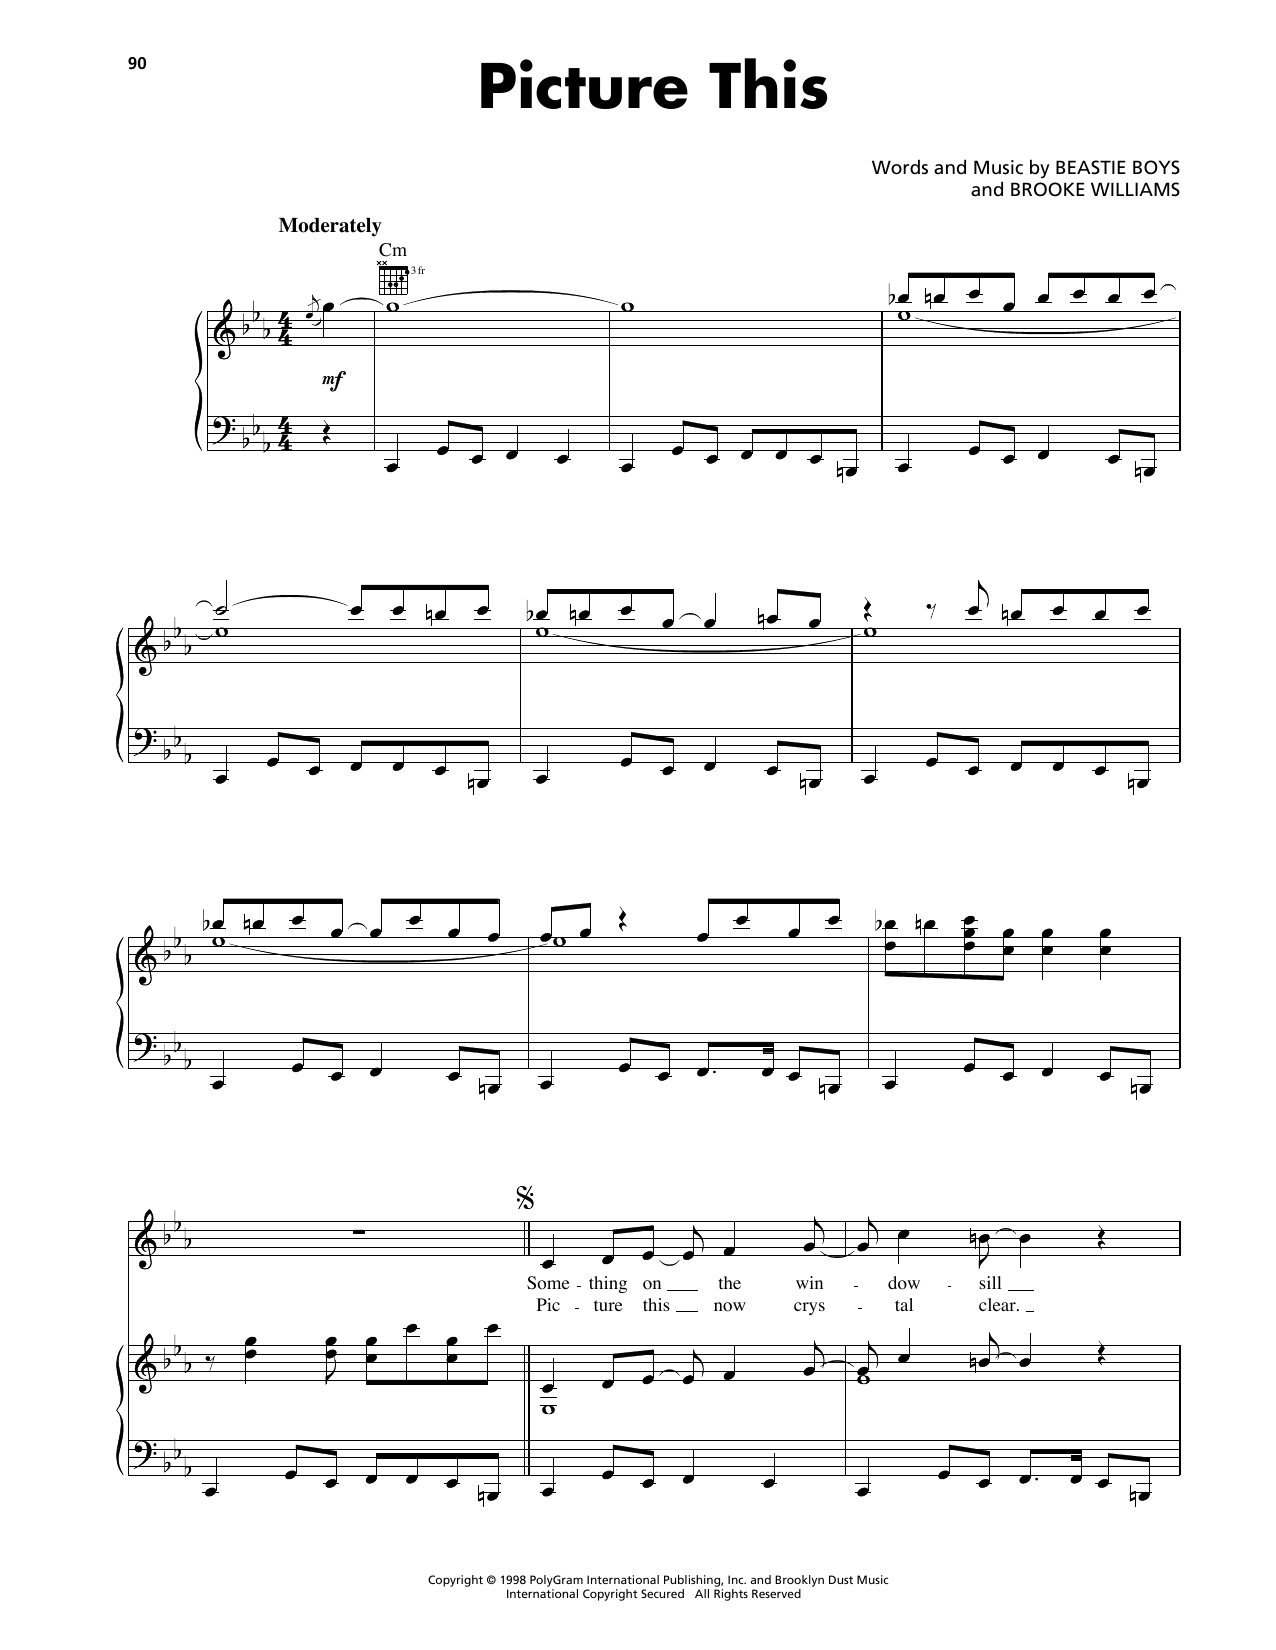 Download Beastie Boys Picture This Sheet Music